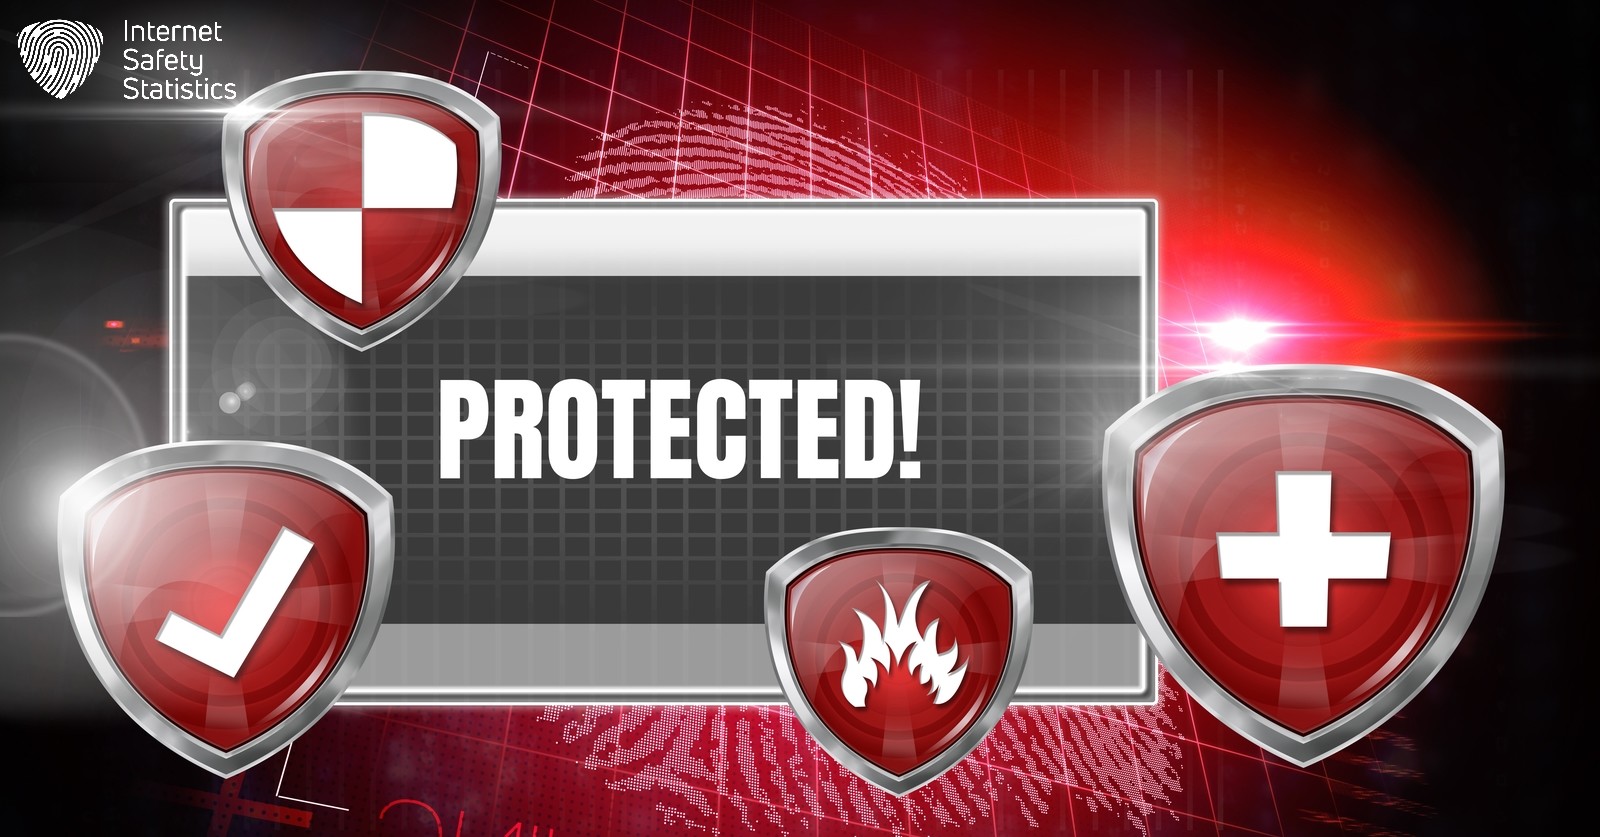 Norton vs Webroot - There are many elements to consider before choosing an antivirus software